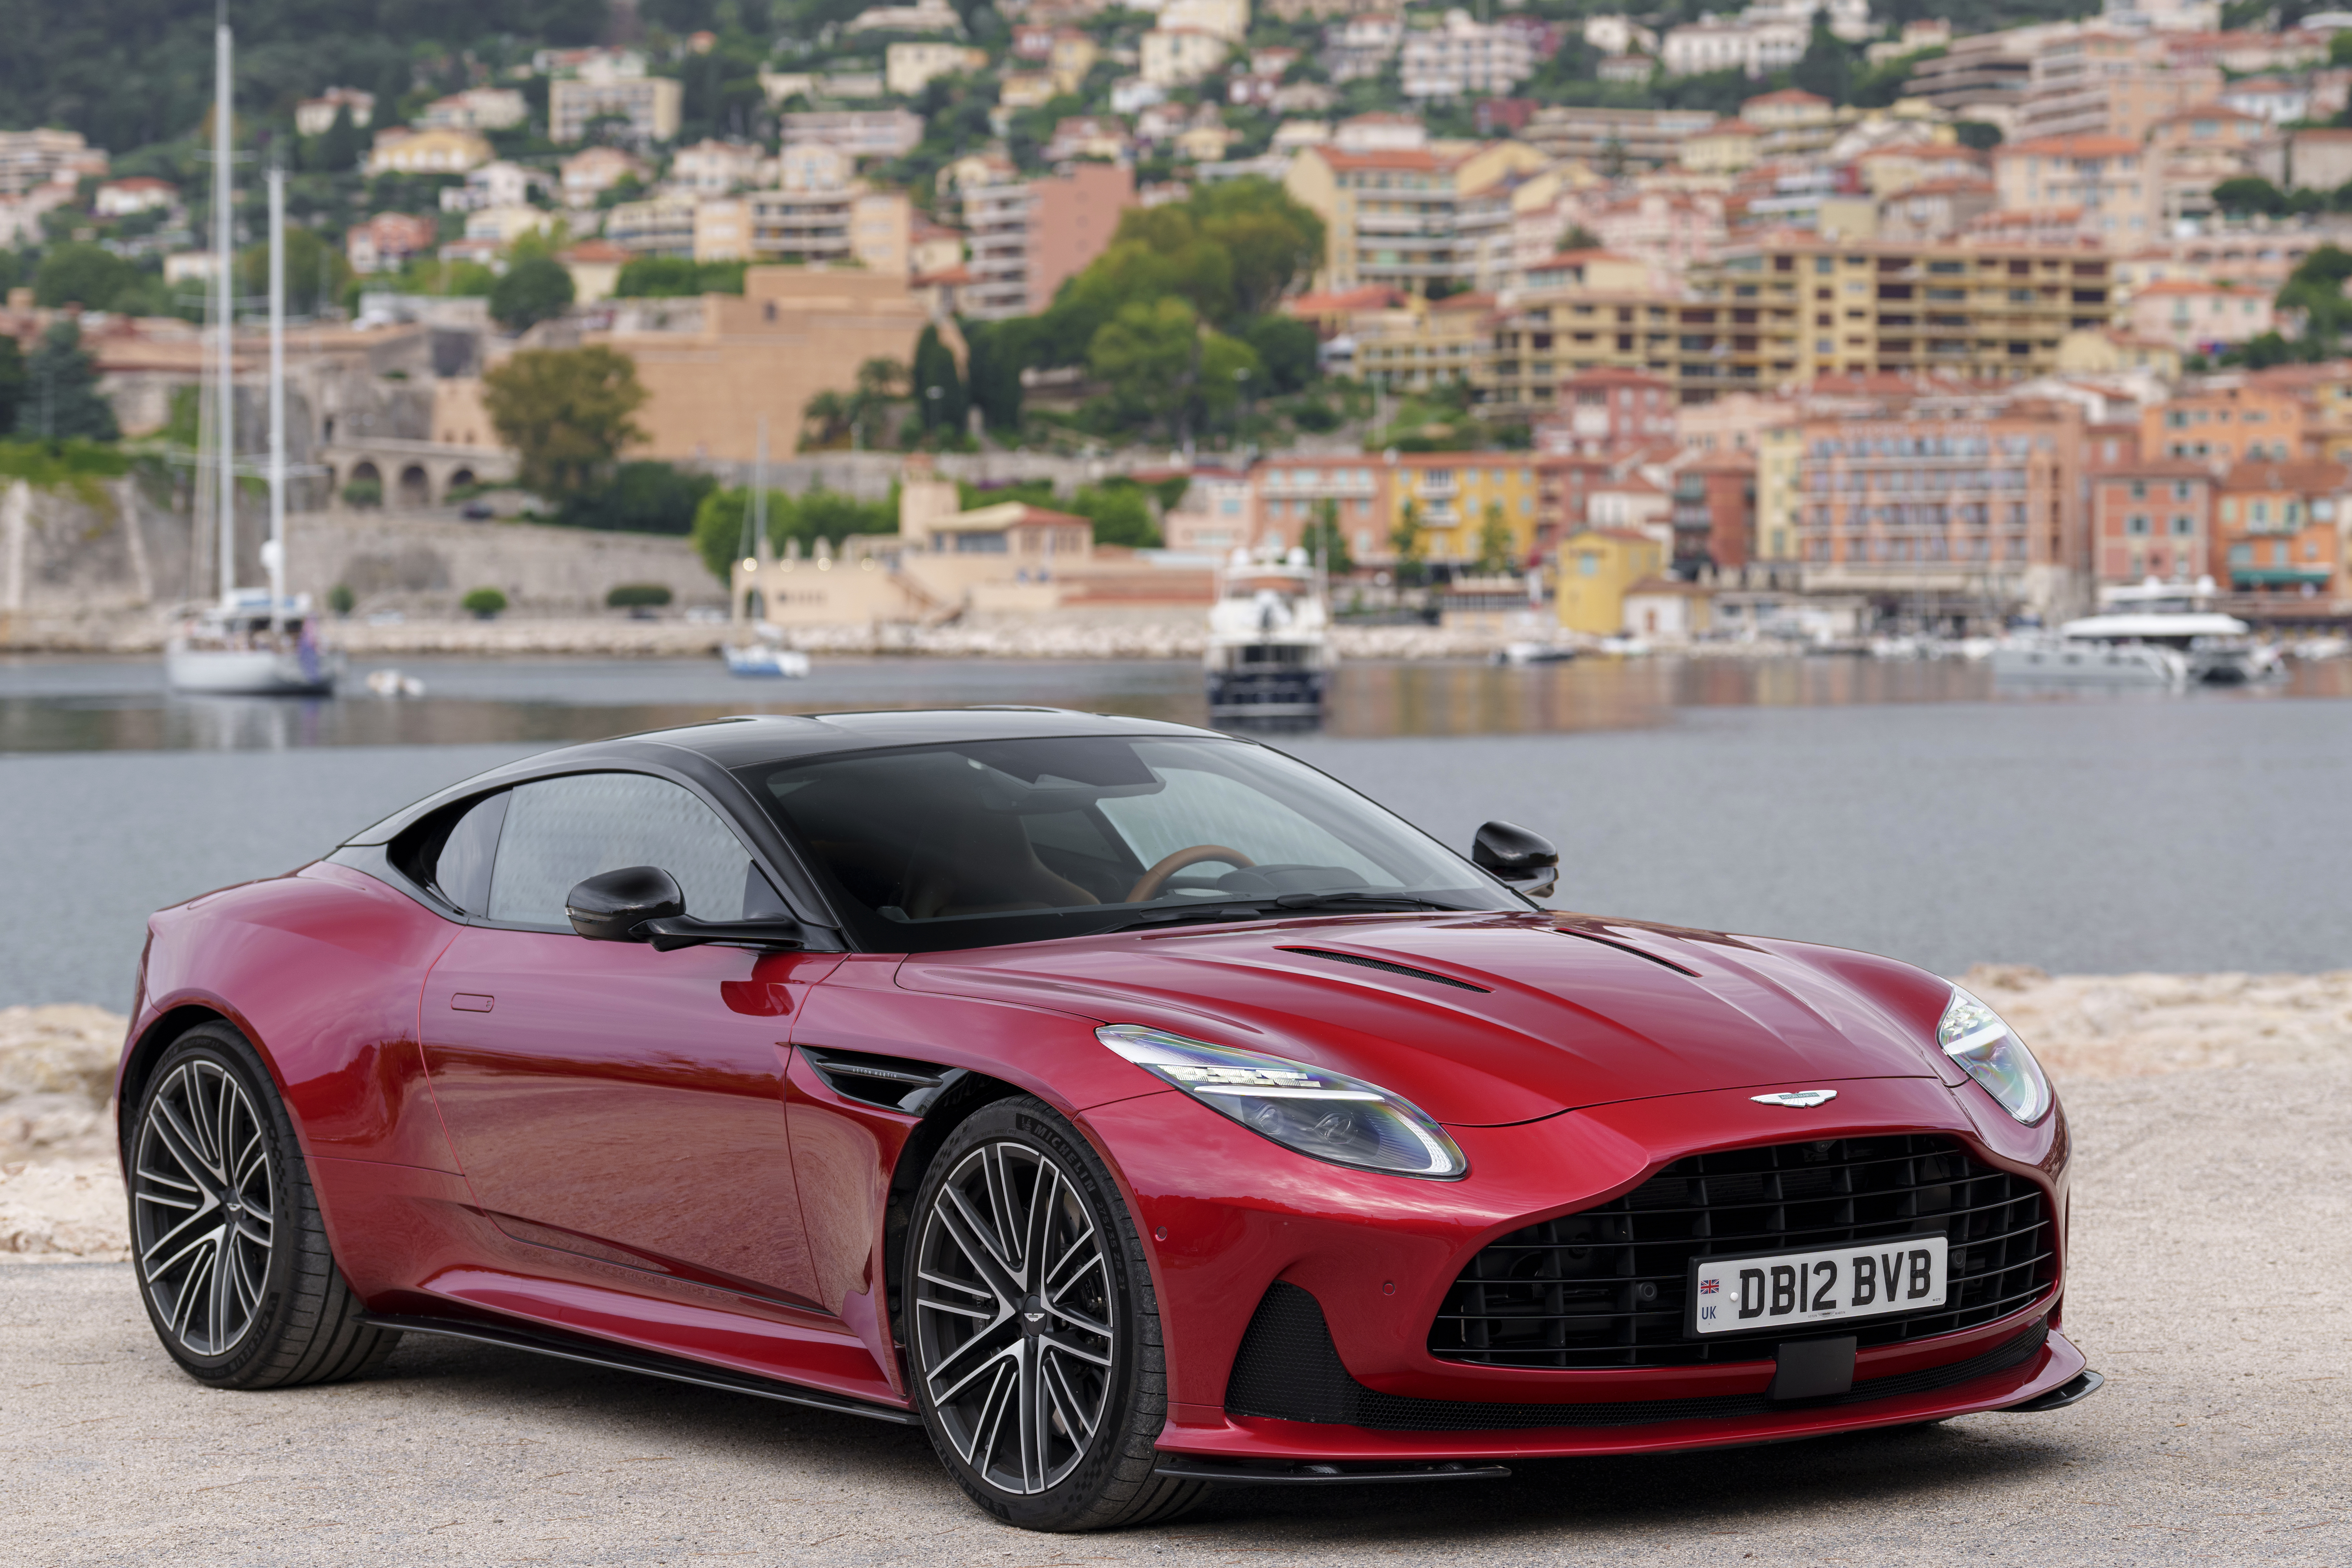 The Aston Martin DB12 in hyper red color